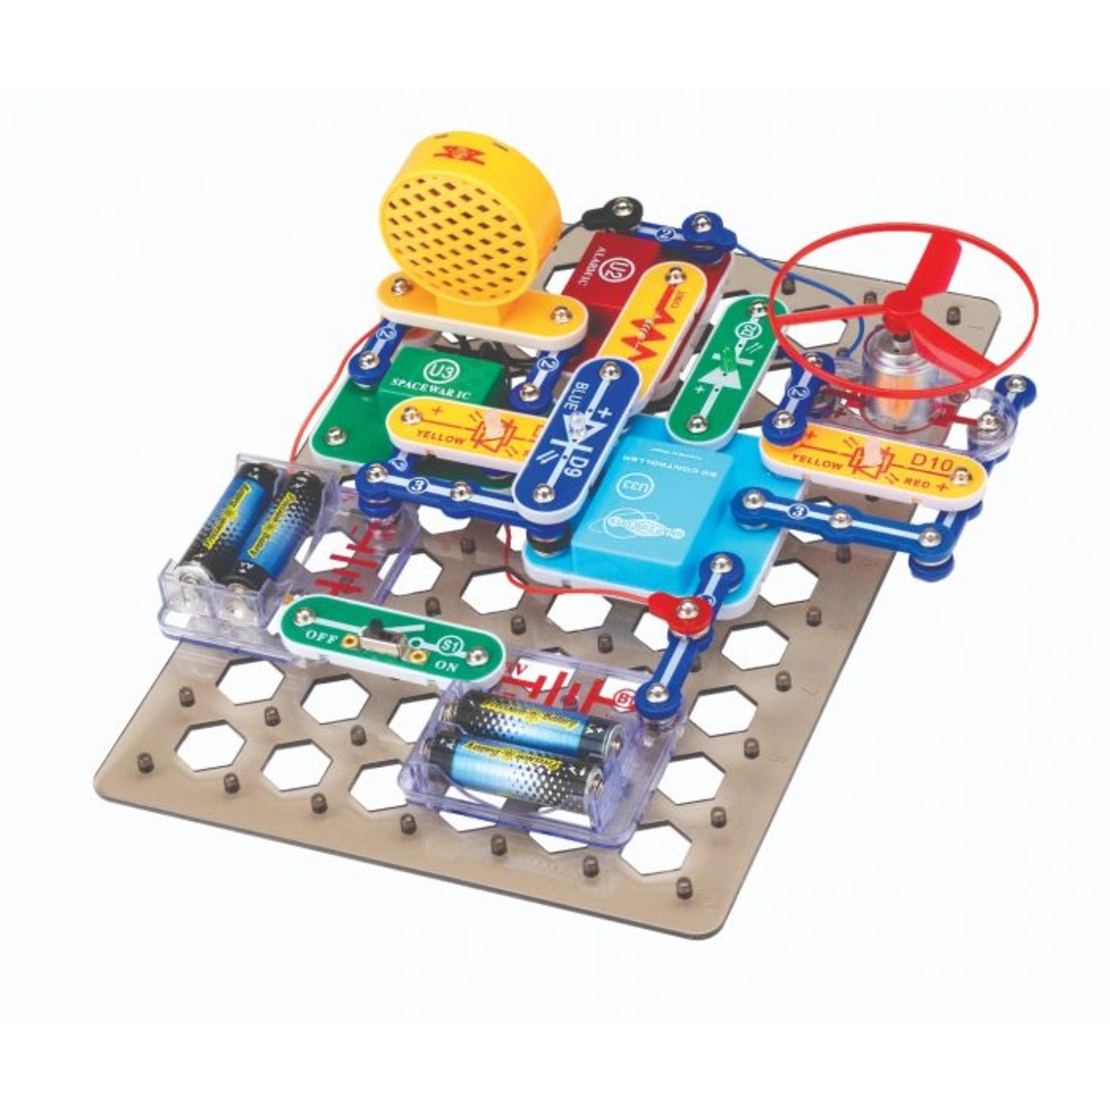 Snap Circuits SCD303 Discover Coding